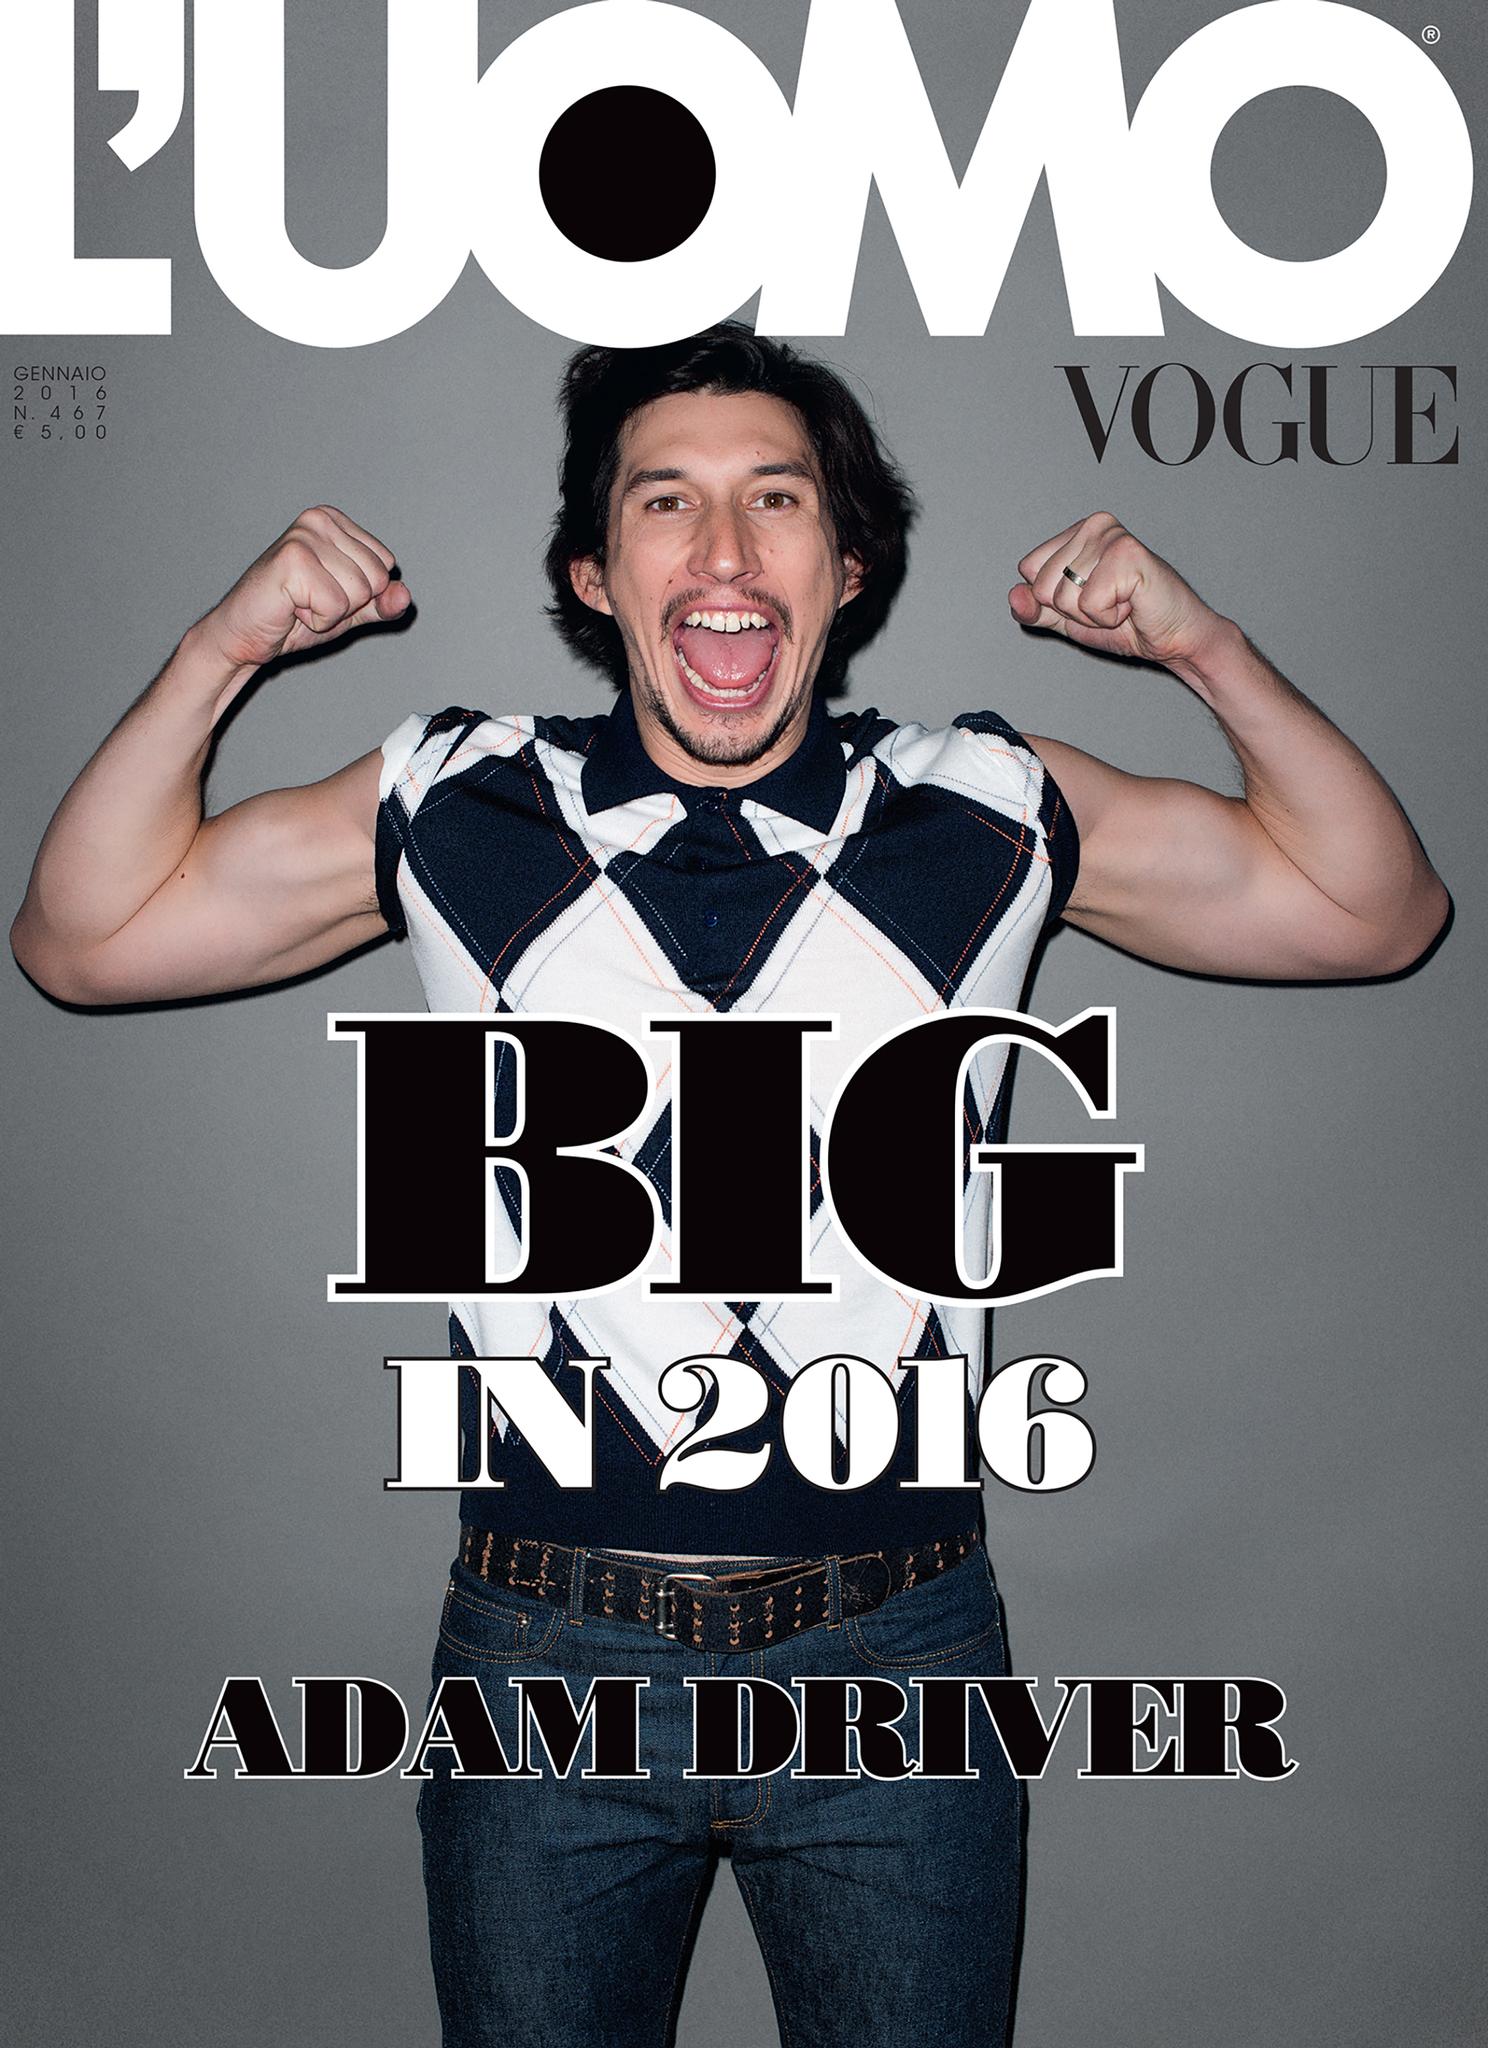 Adam Driver Covers L'Uomo Vogue, Dishes on Fame & Acting